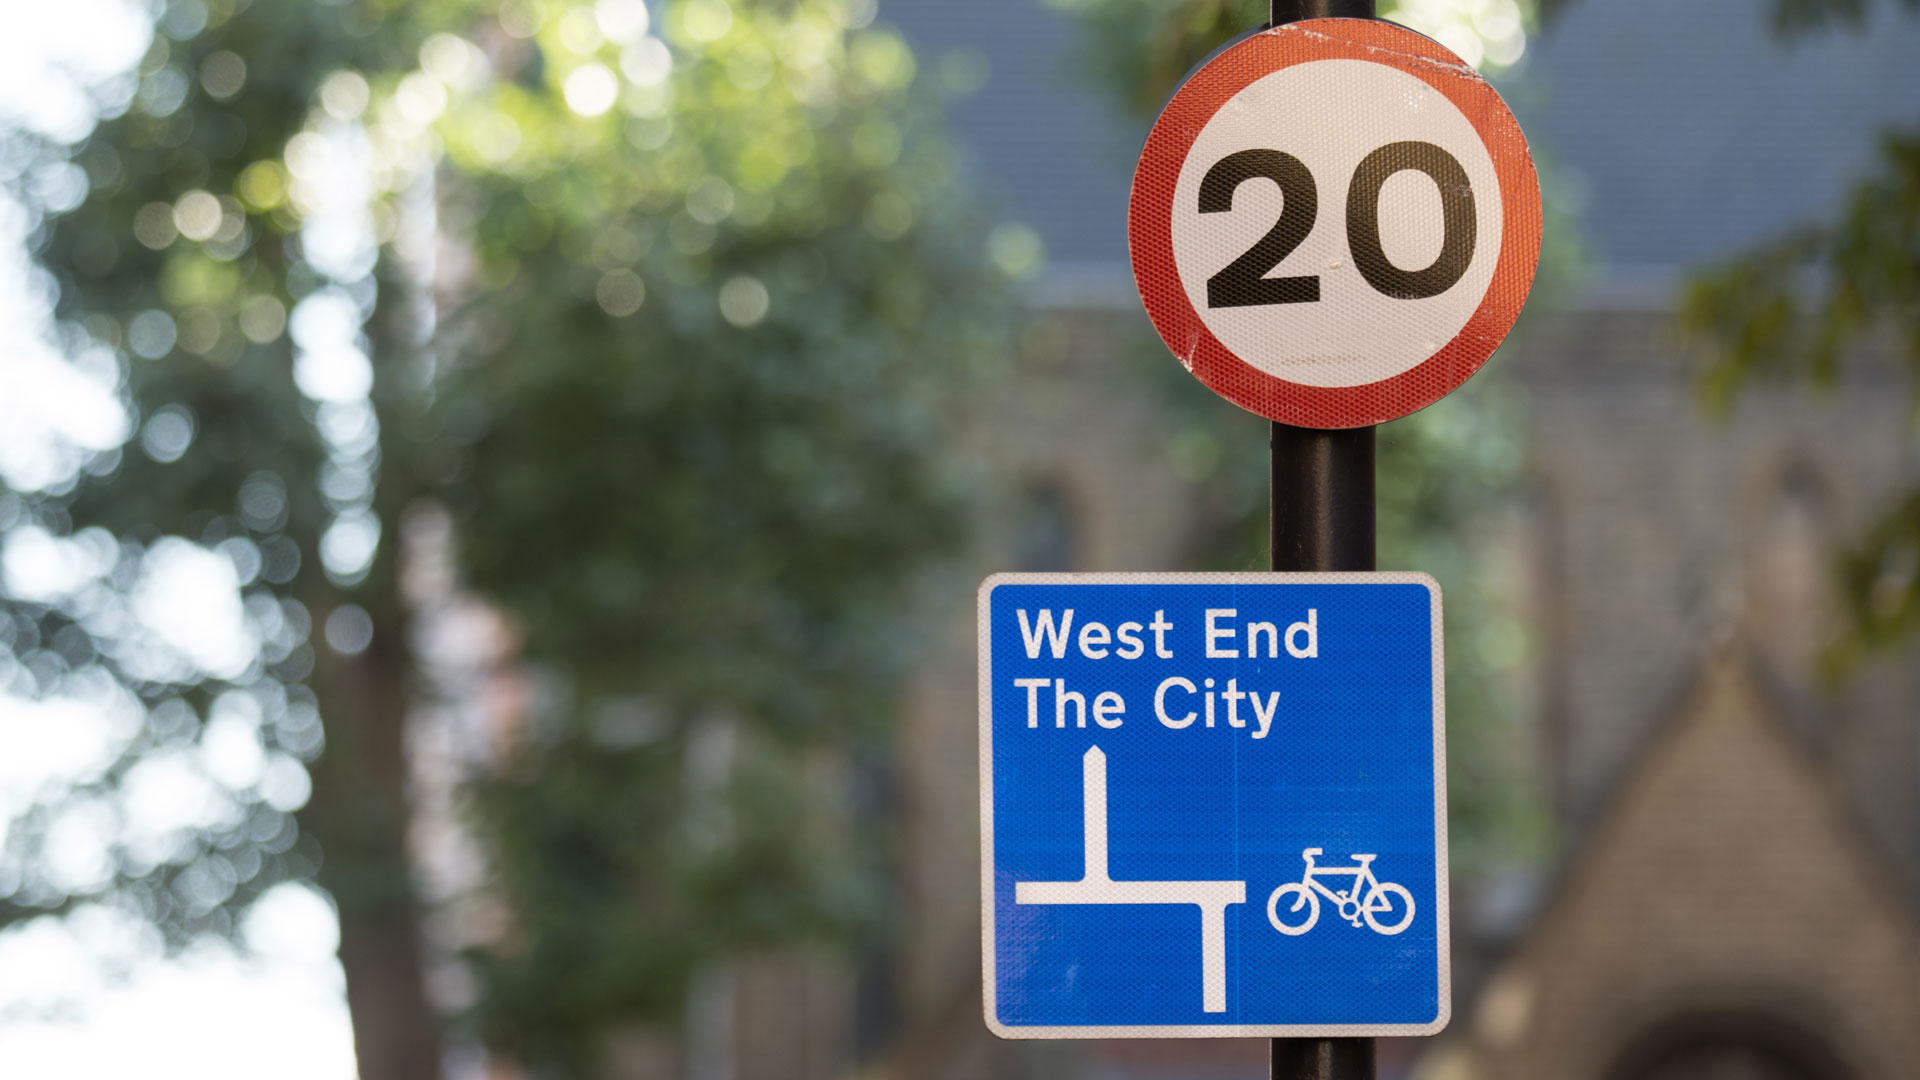 Plans to introduce 20mph speed limit in central London